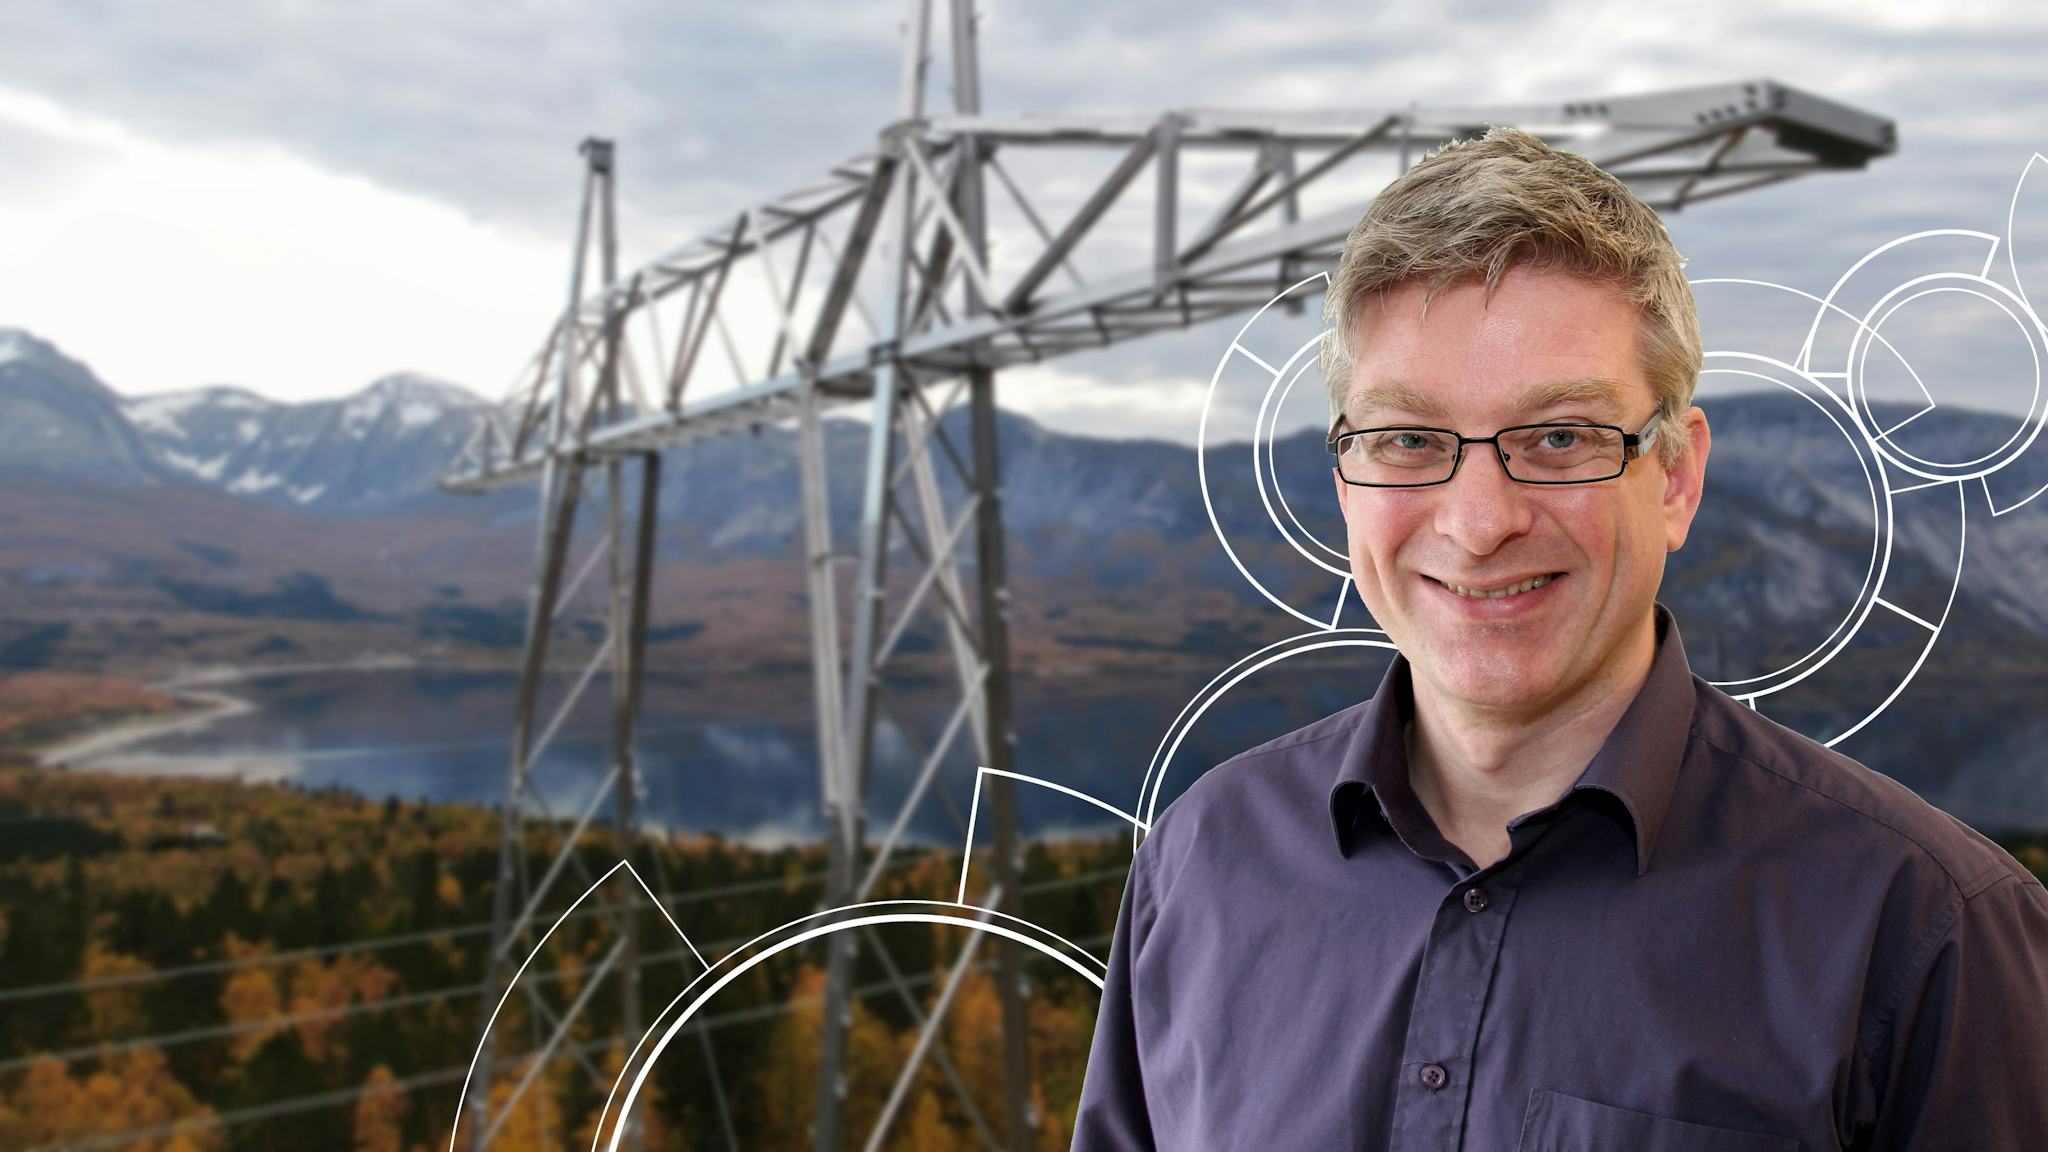 A smiling man with the background of transmission tower